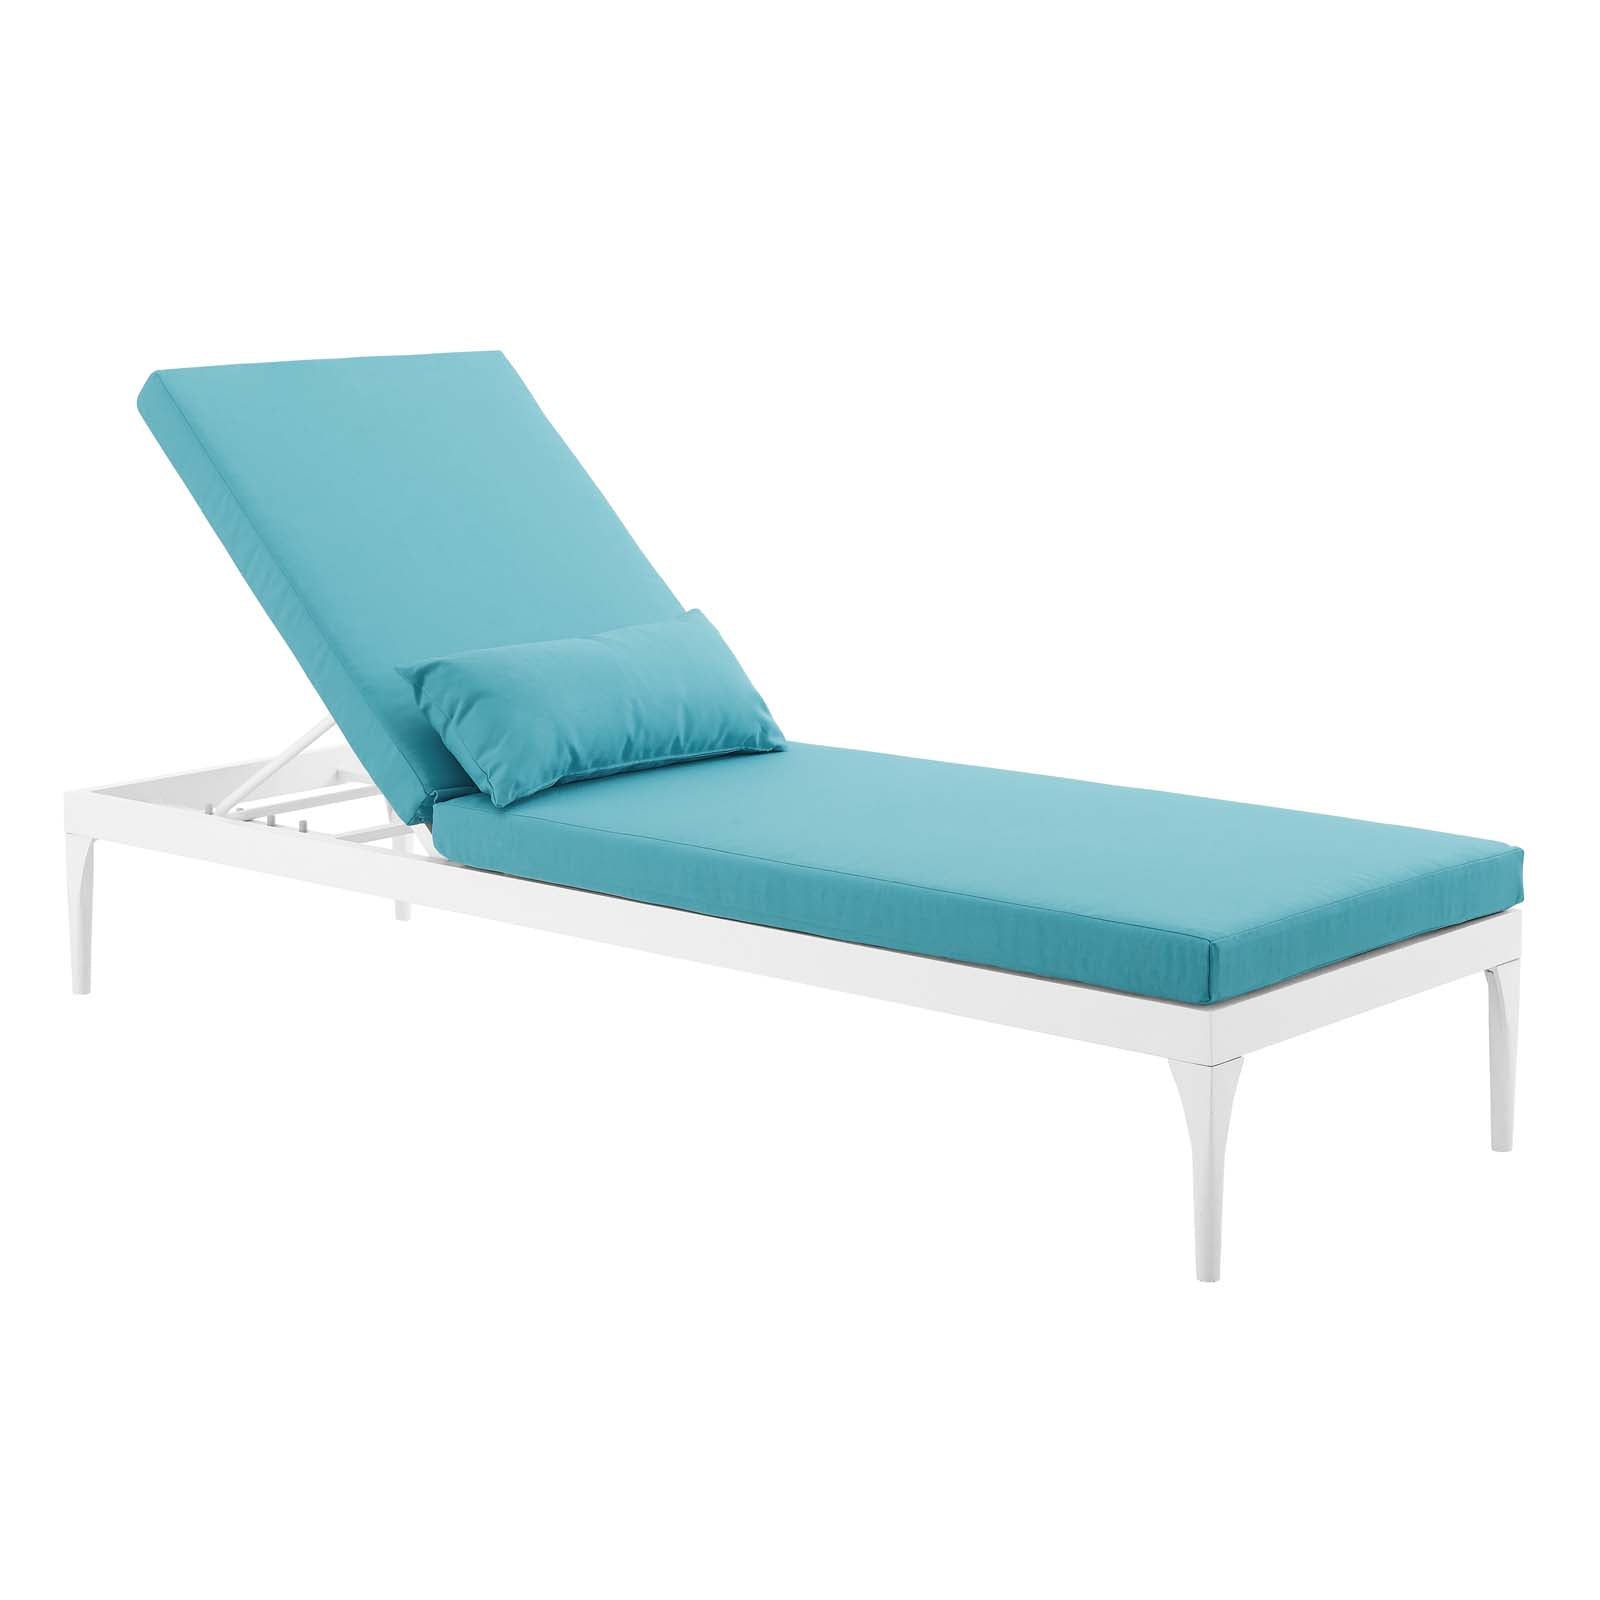 Modway Outdoor Loungers - Perspective Cushion Outdoor Patio Chaise Lounge Chair White Turquoise